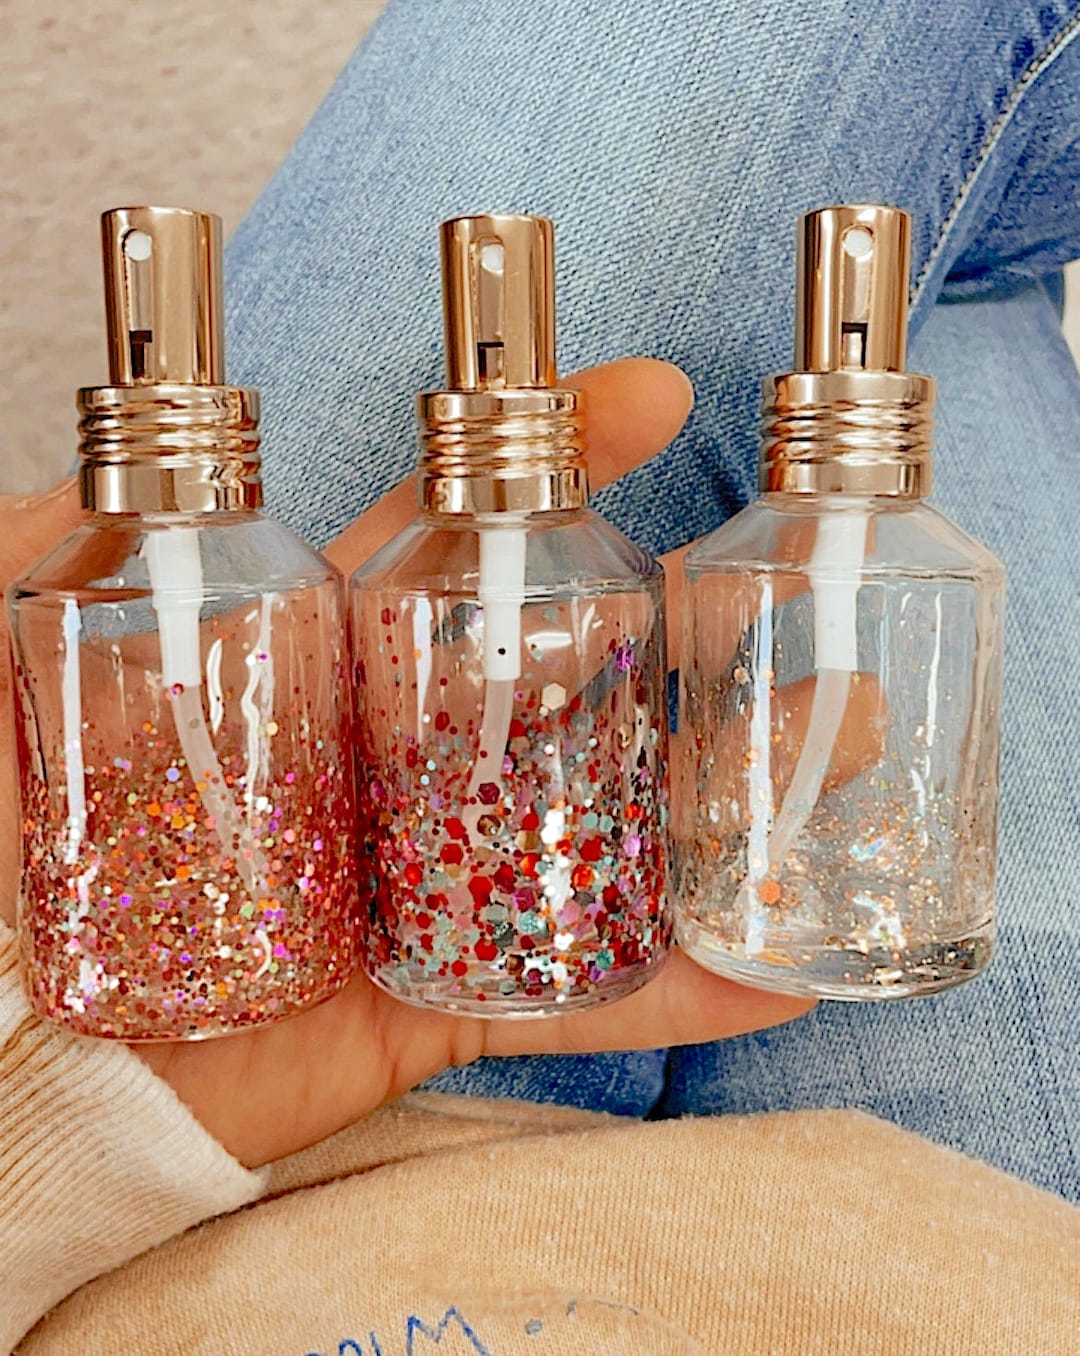 Glitter Spray for Hair And Body, Pink Glitter Perfume Spray, Pink Spray  Glitter for Hair With Refill, Sparkle Hair Spray for Body and Clothes, Body